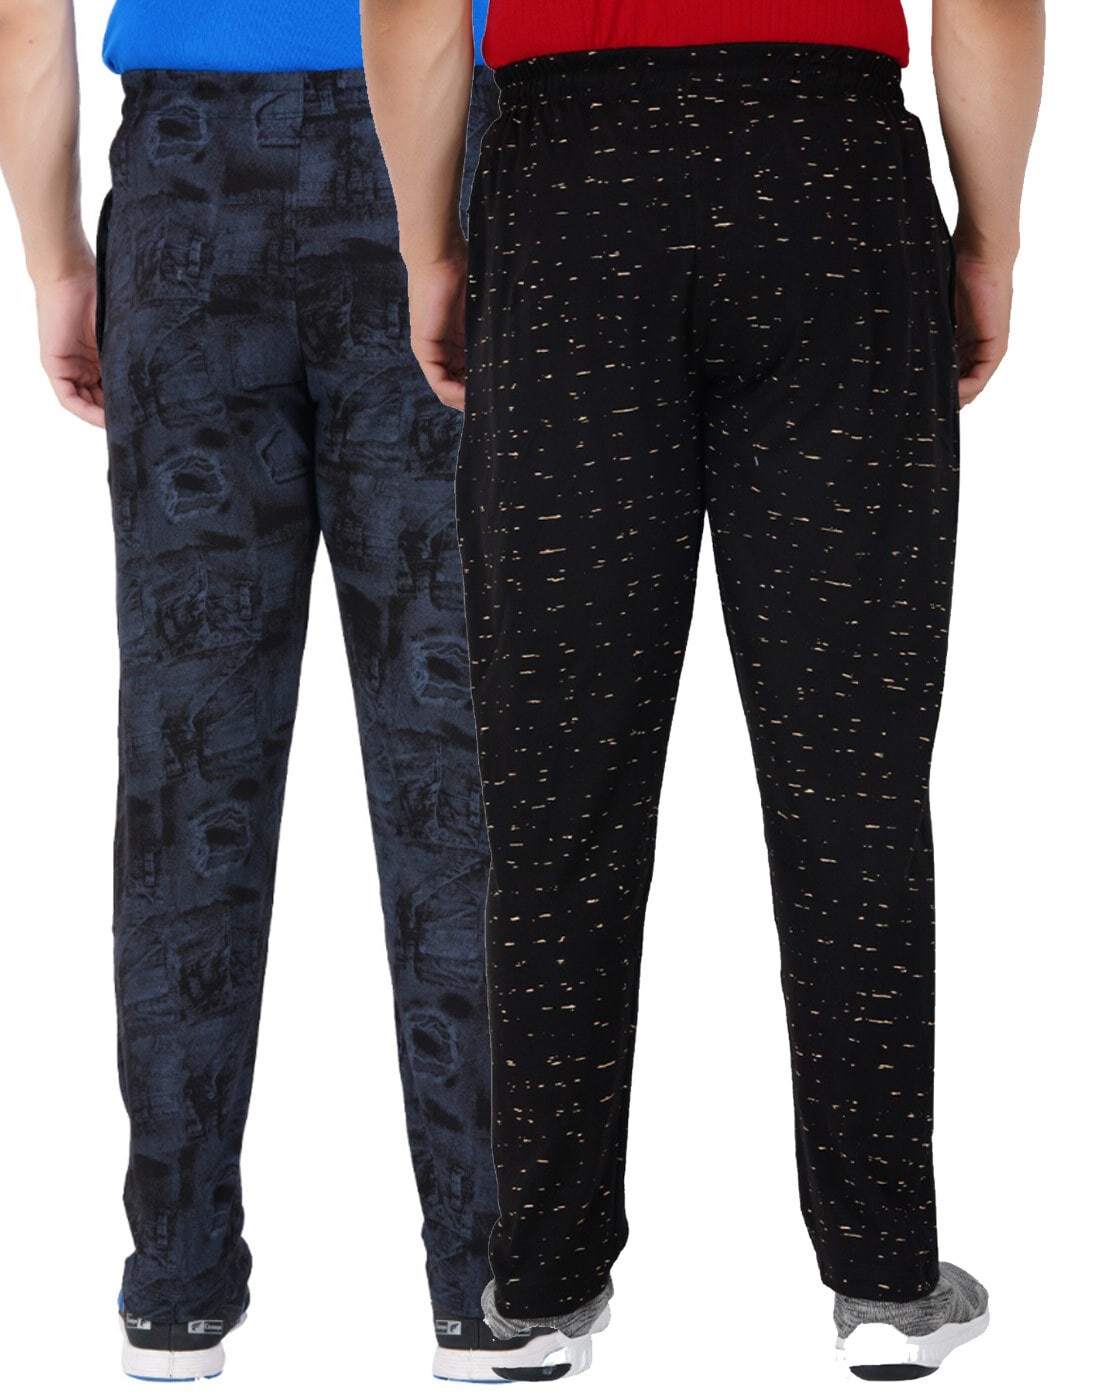 New Fashion Mens Summer Printed Jogger Pants Hot Style Casual Formal  Trousers For Men For Fitness, Basketball, Gym And Sweatpants By Dhgate From  Fashionfirst, $19.43 | DHgate.Com